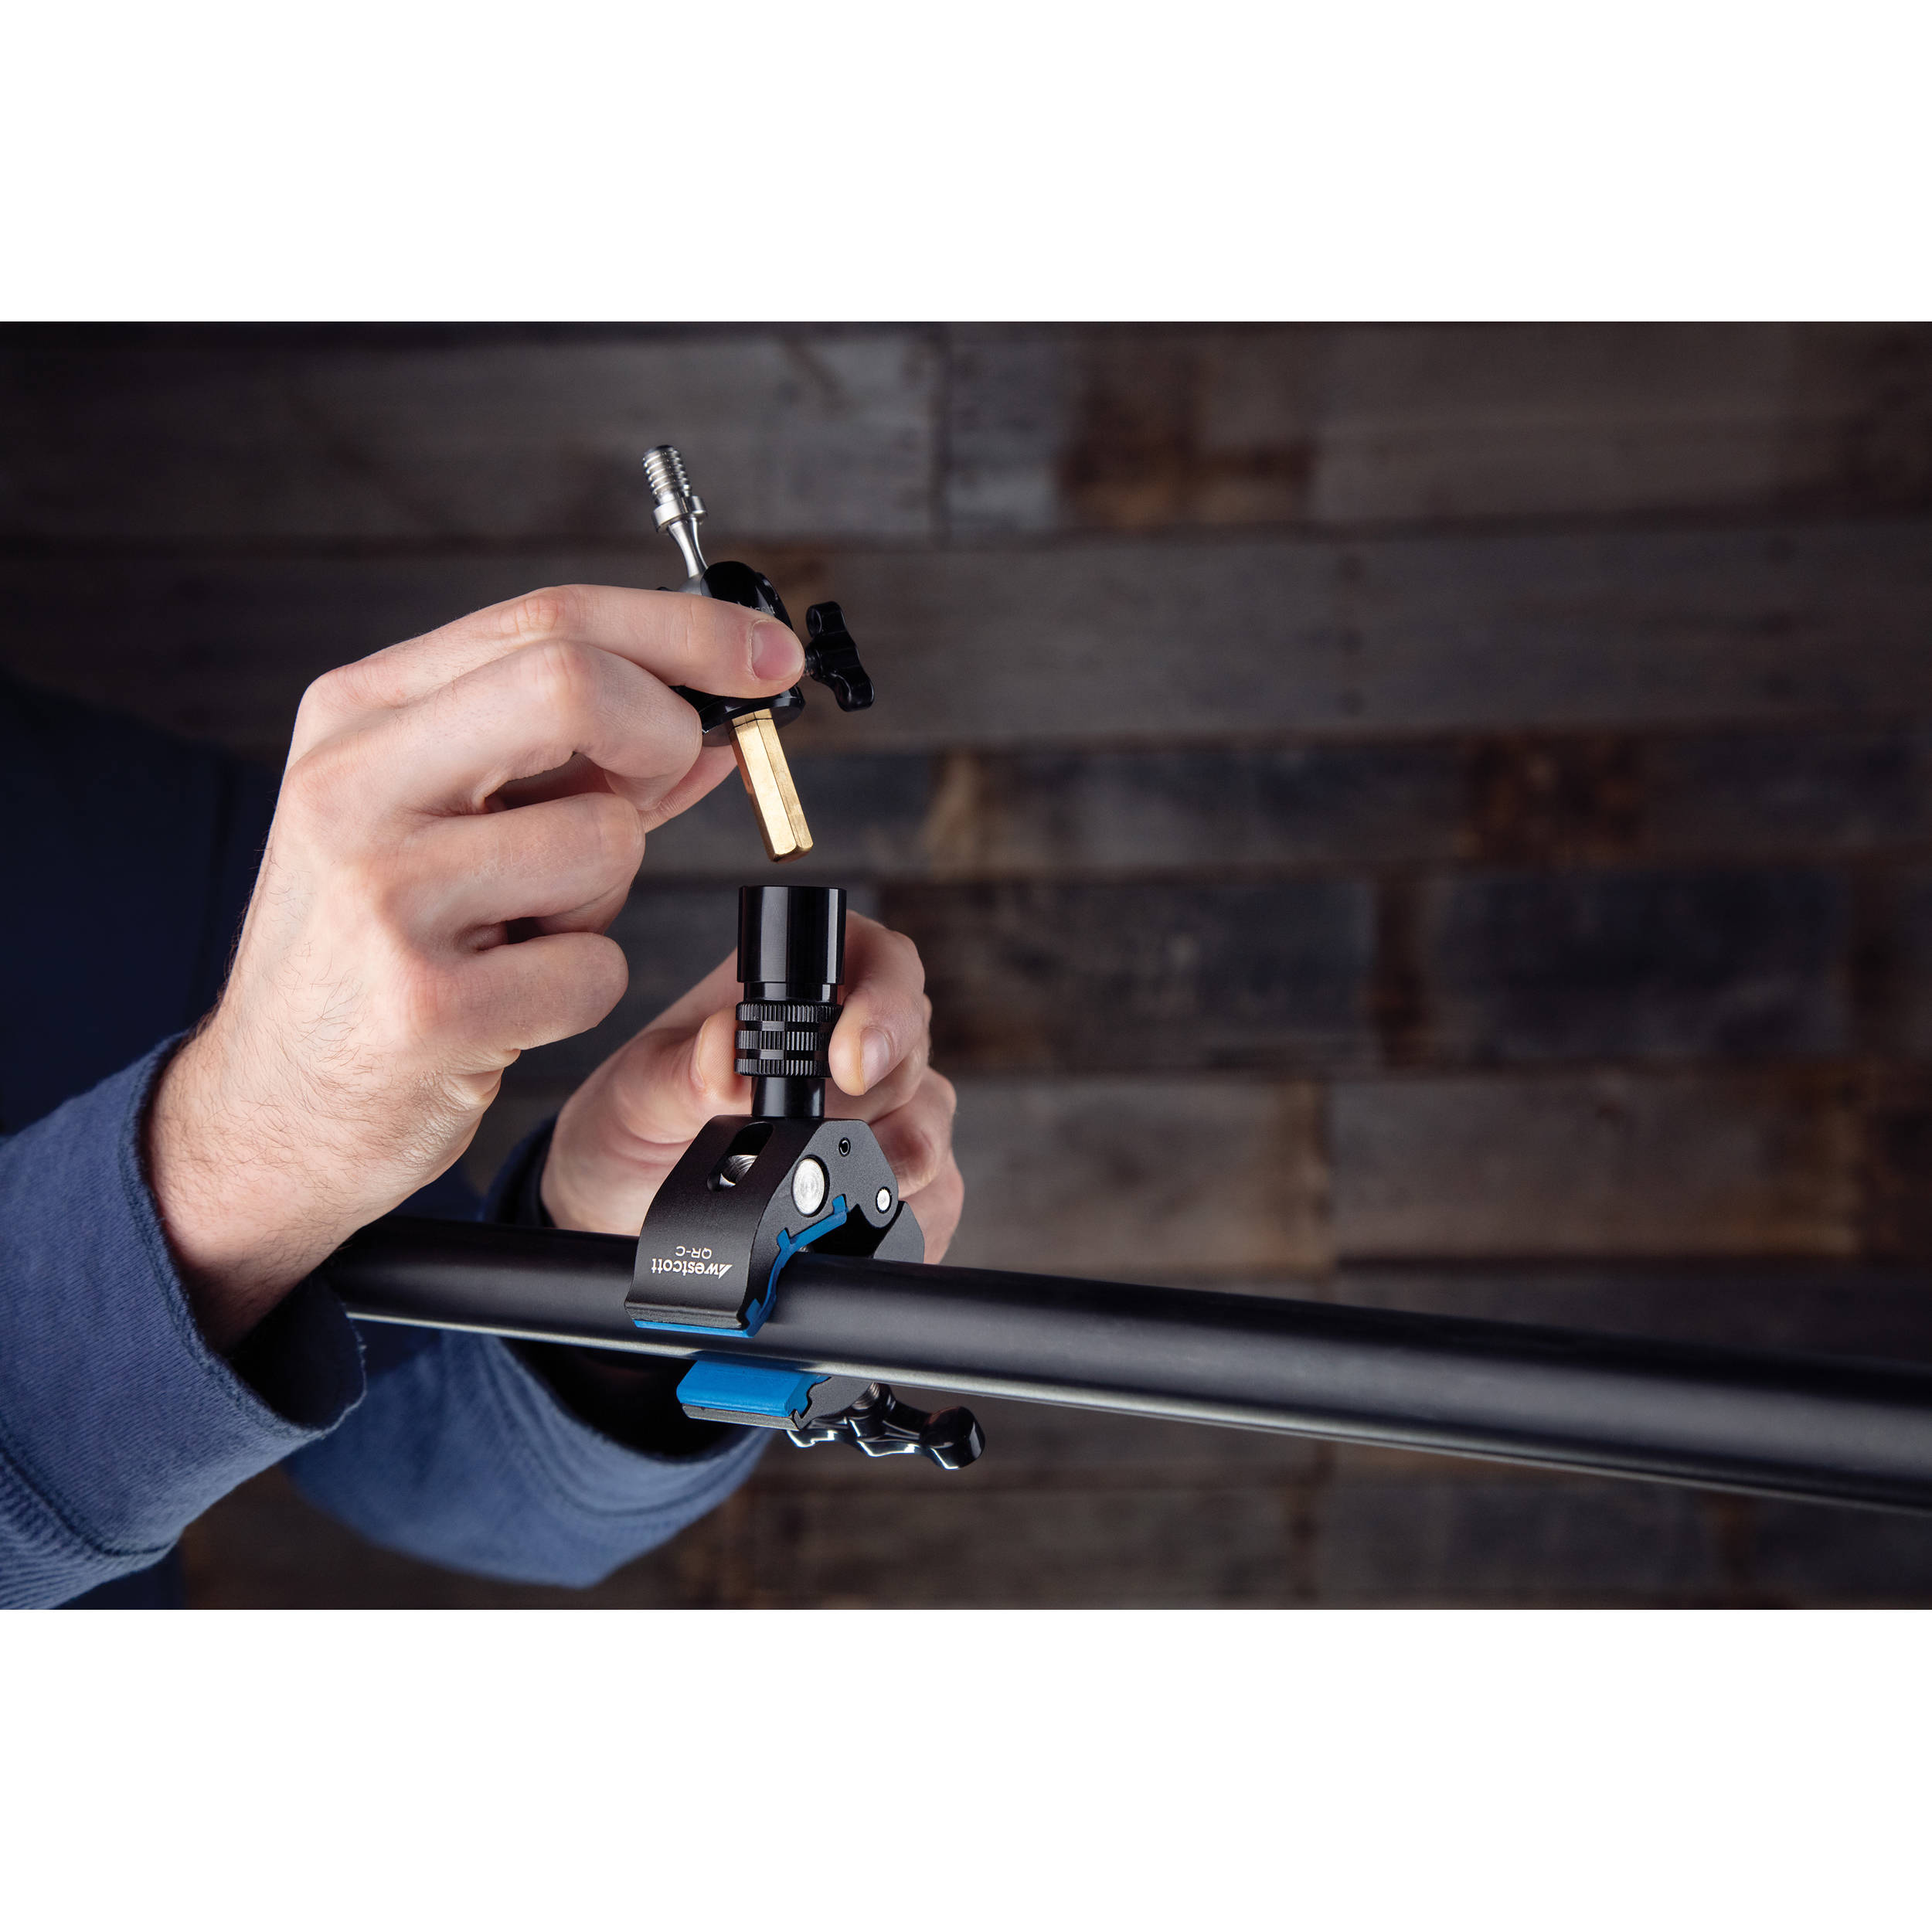 Westcott Quick-Release Clamp Mounting Kit